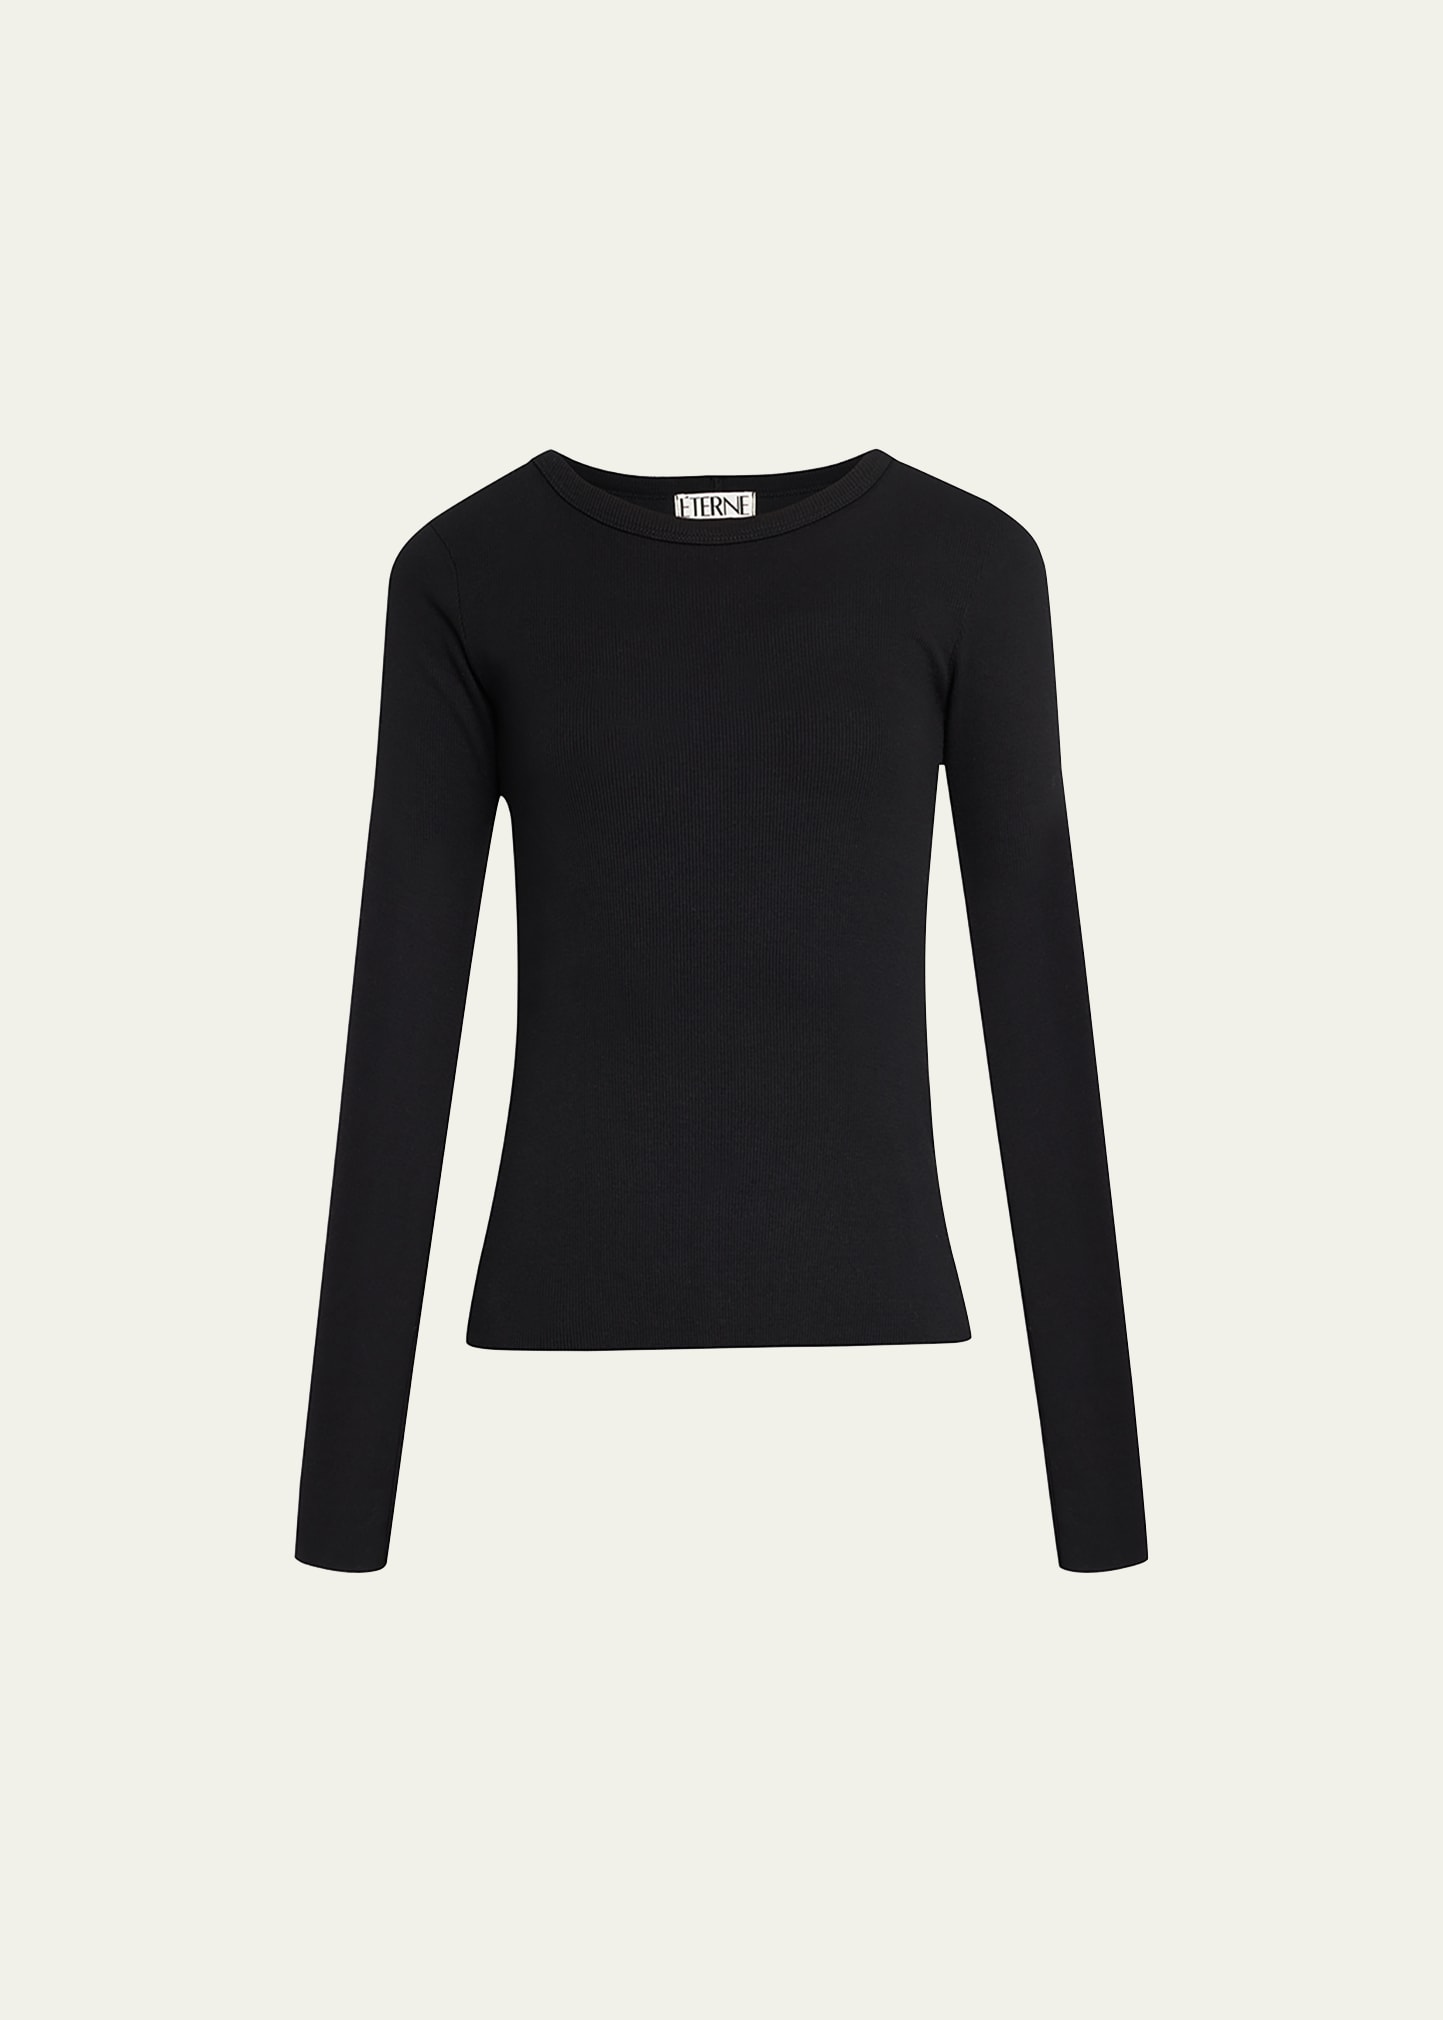 Long-Sleeve Fitted Crewneck Top